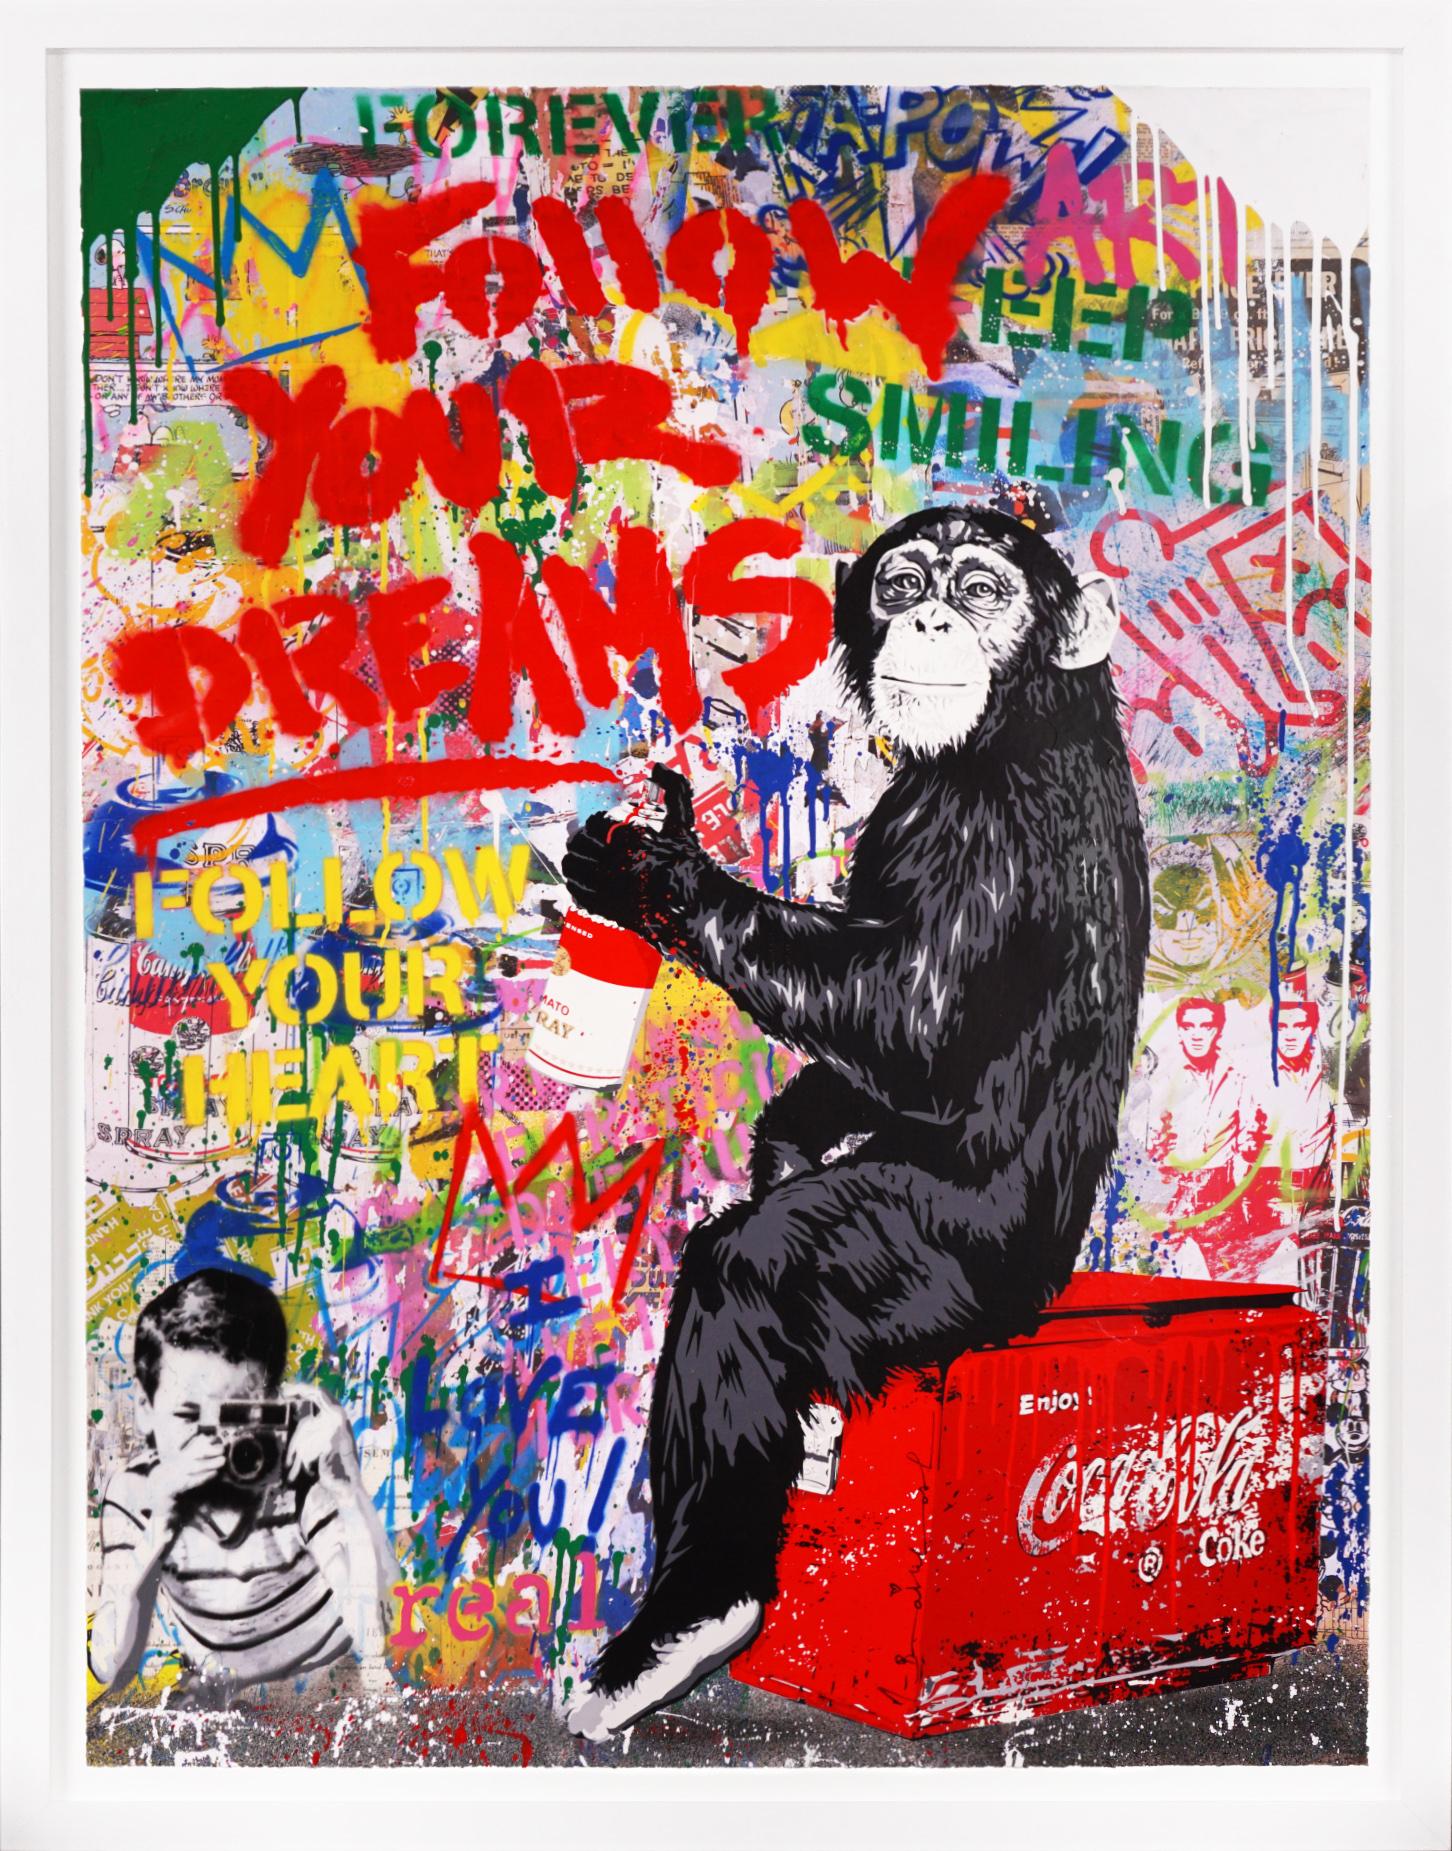 Mr. Brainwash Abstract Painting - 'Follow Your Dreams' Monkey, Unique, Street Pop Art Painting, 2021